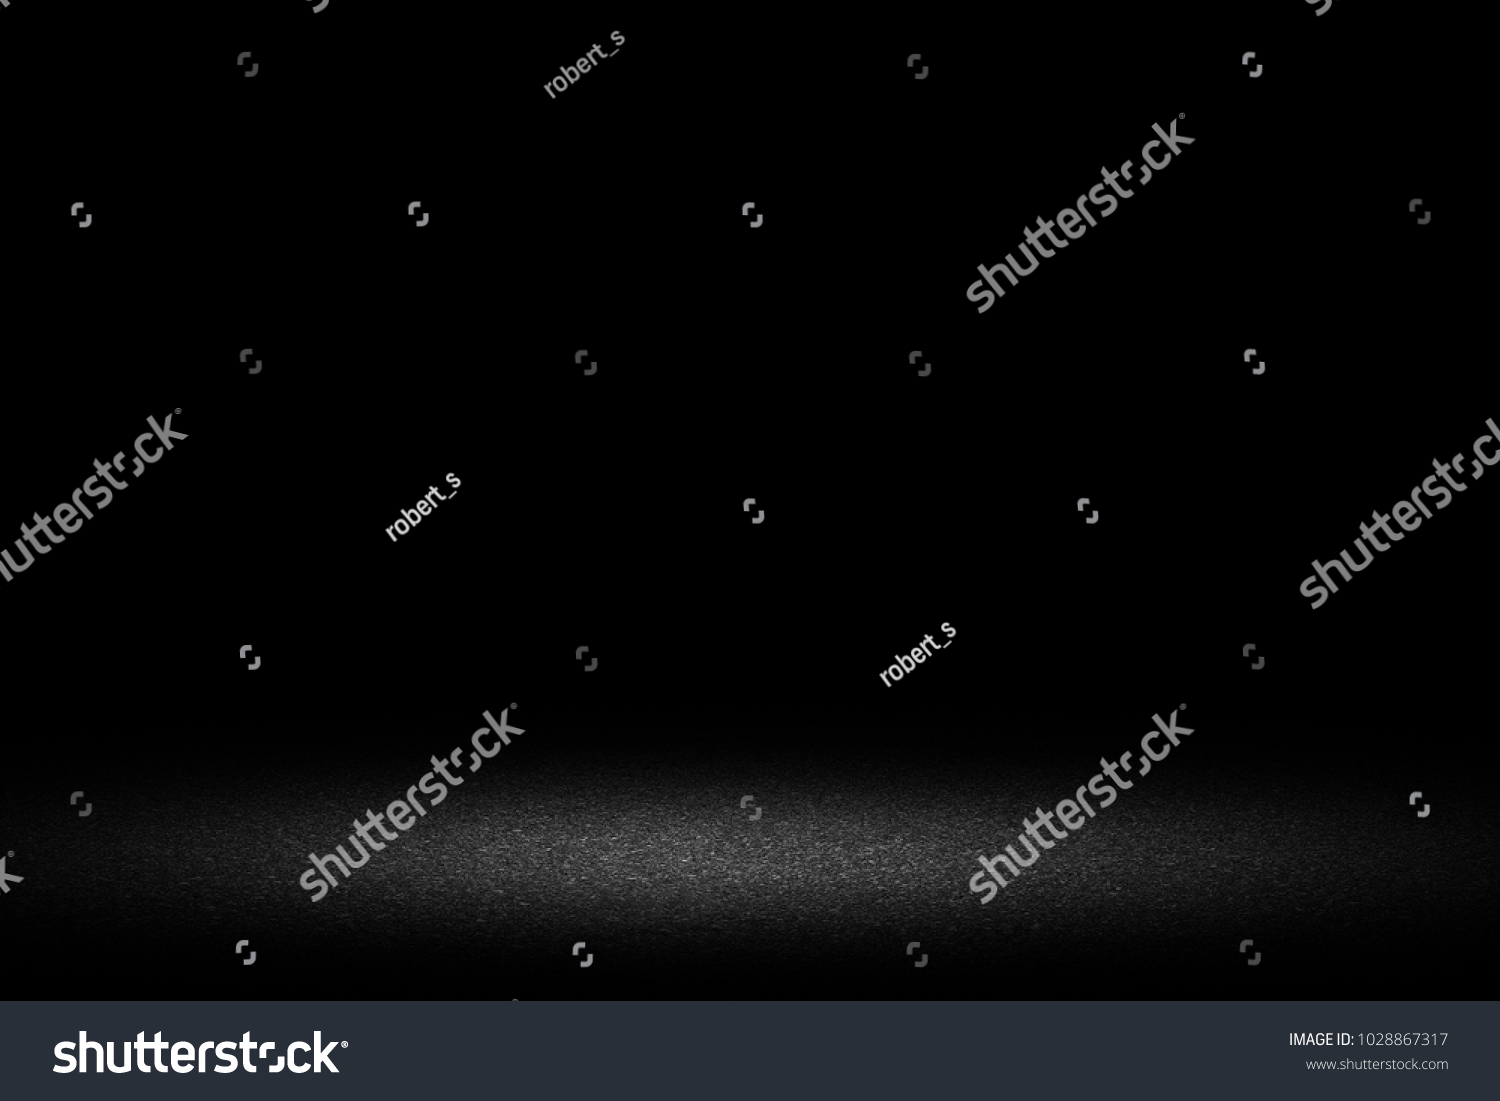 Dark room with concrete floor and wall background #1028867317